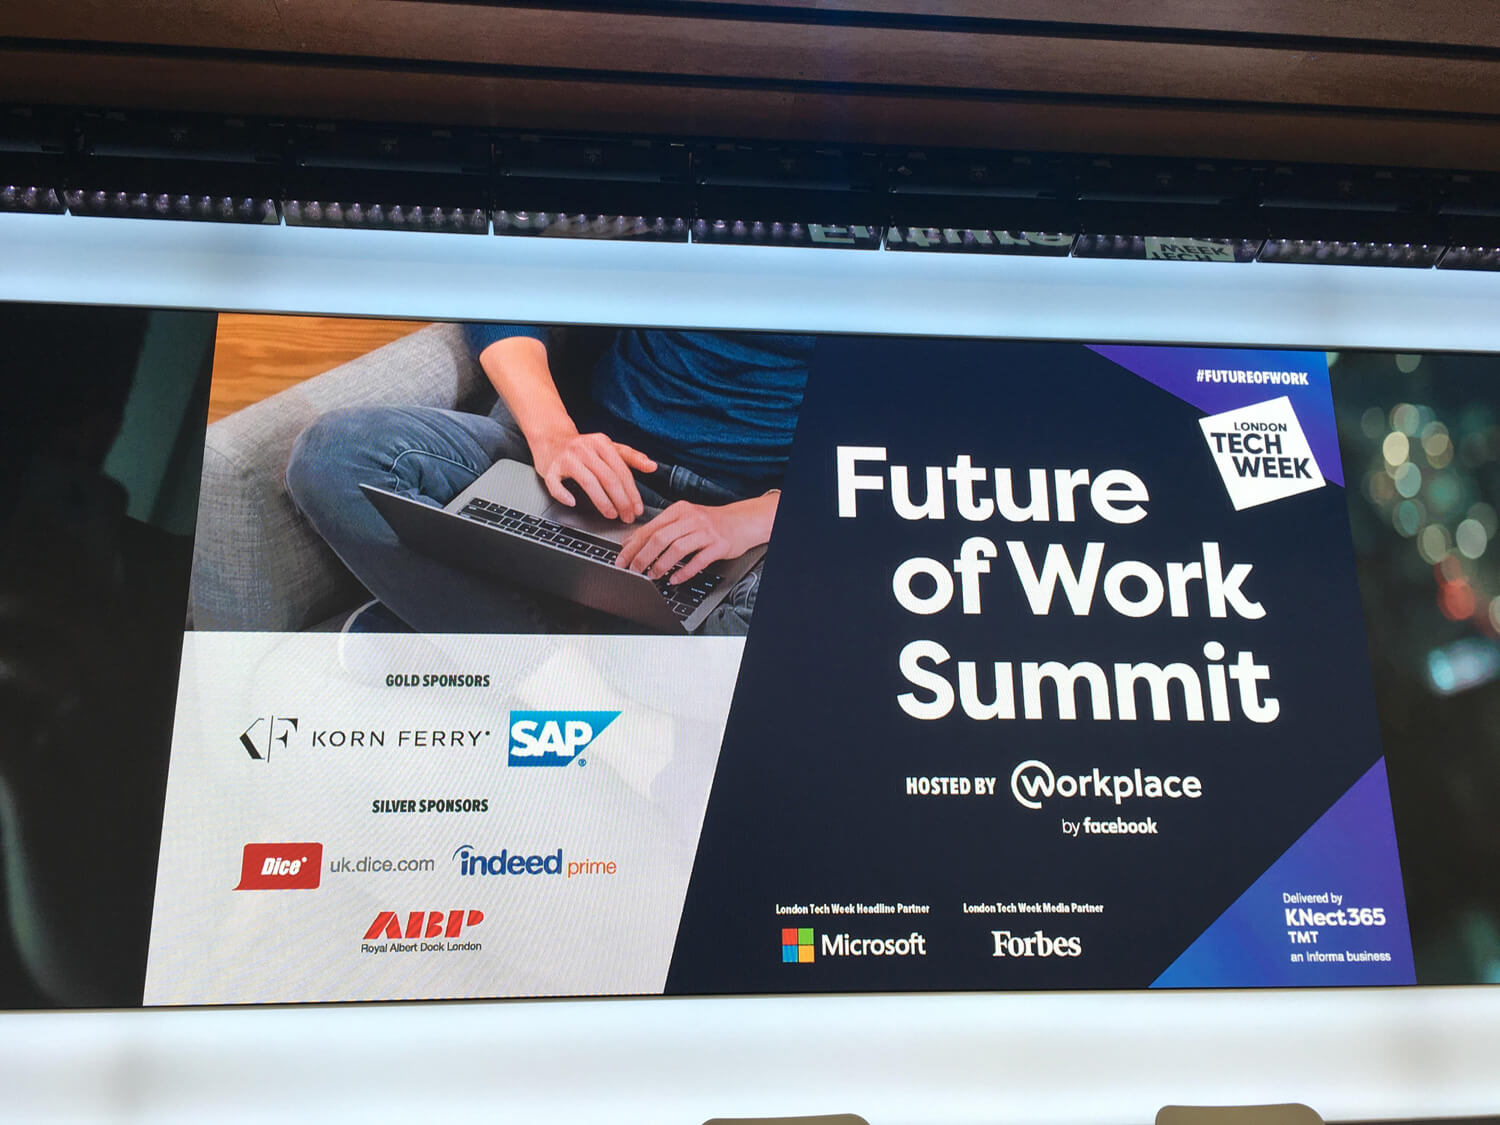 Future of Work Summit Hosted by workplace HR Tech Partnership